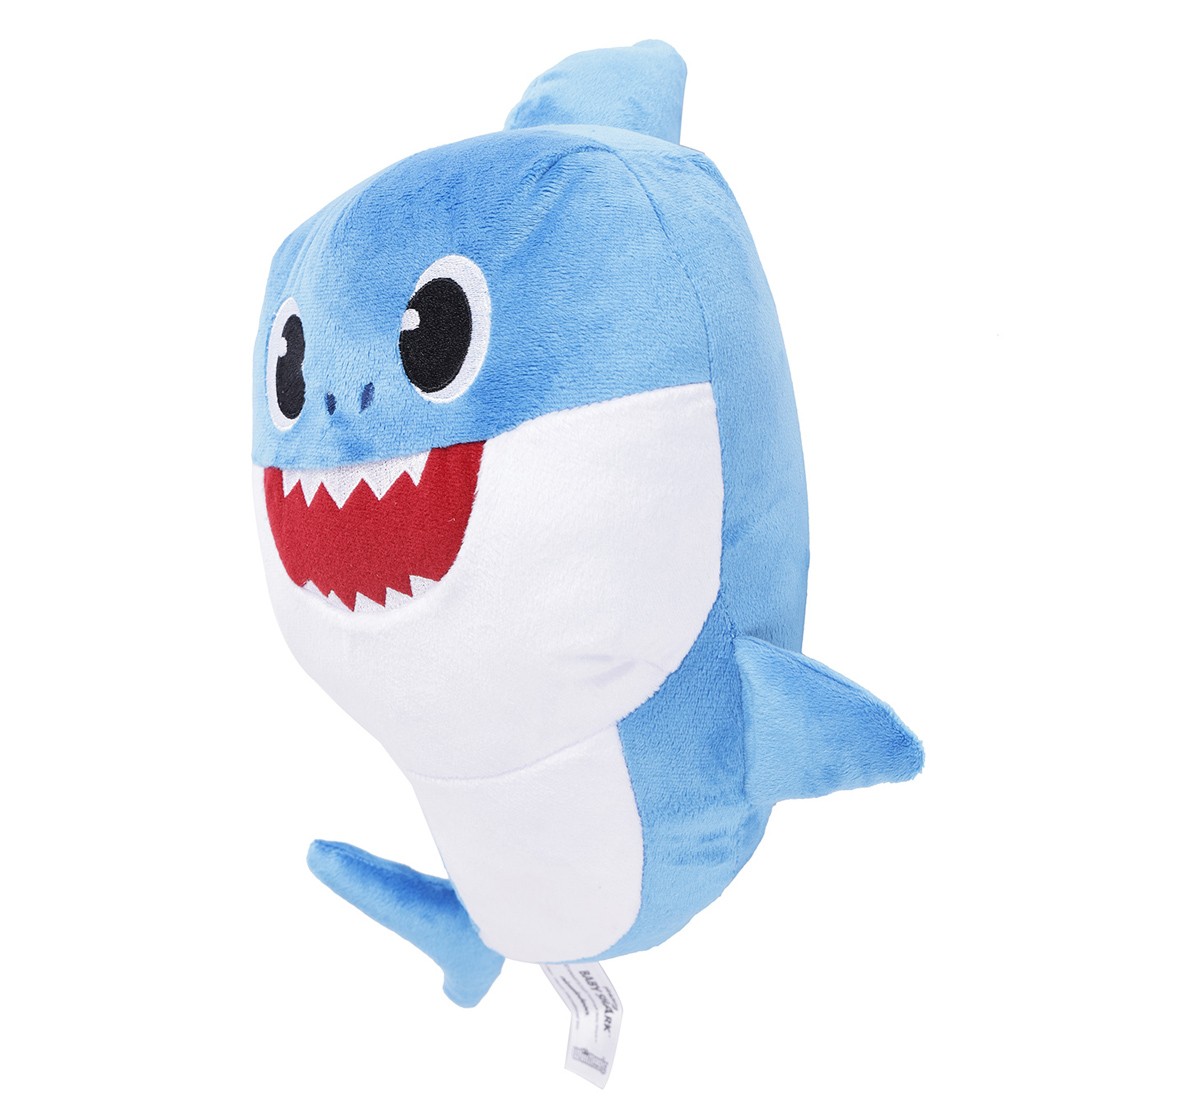 Baby Shark Plush Singing Plush Toy 8 Inch Daddy Shark for 1 Year and Above